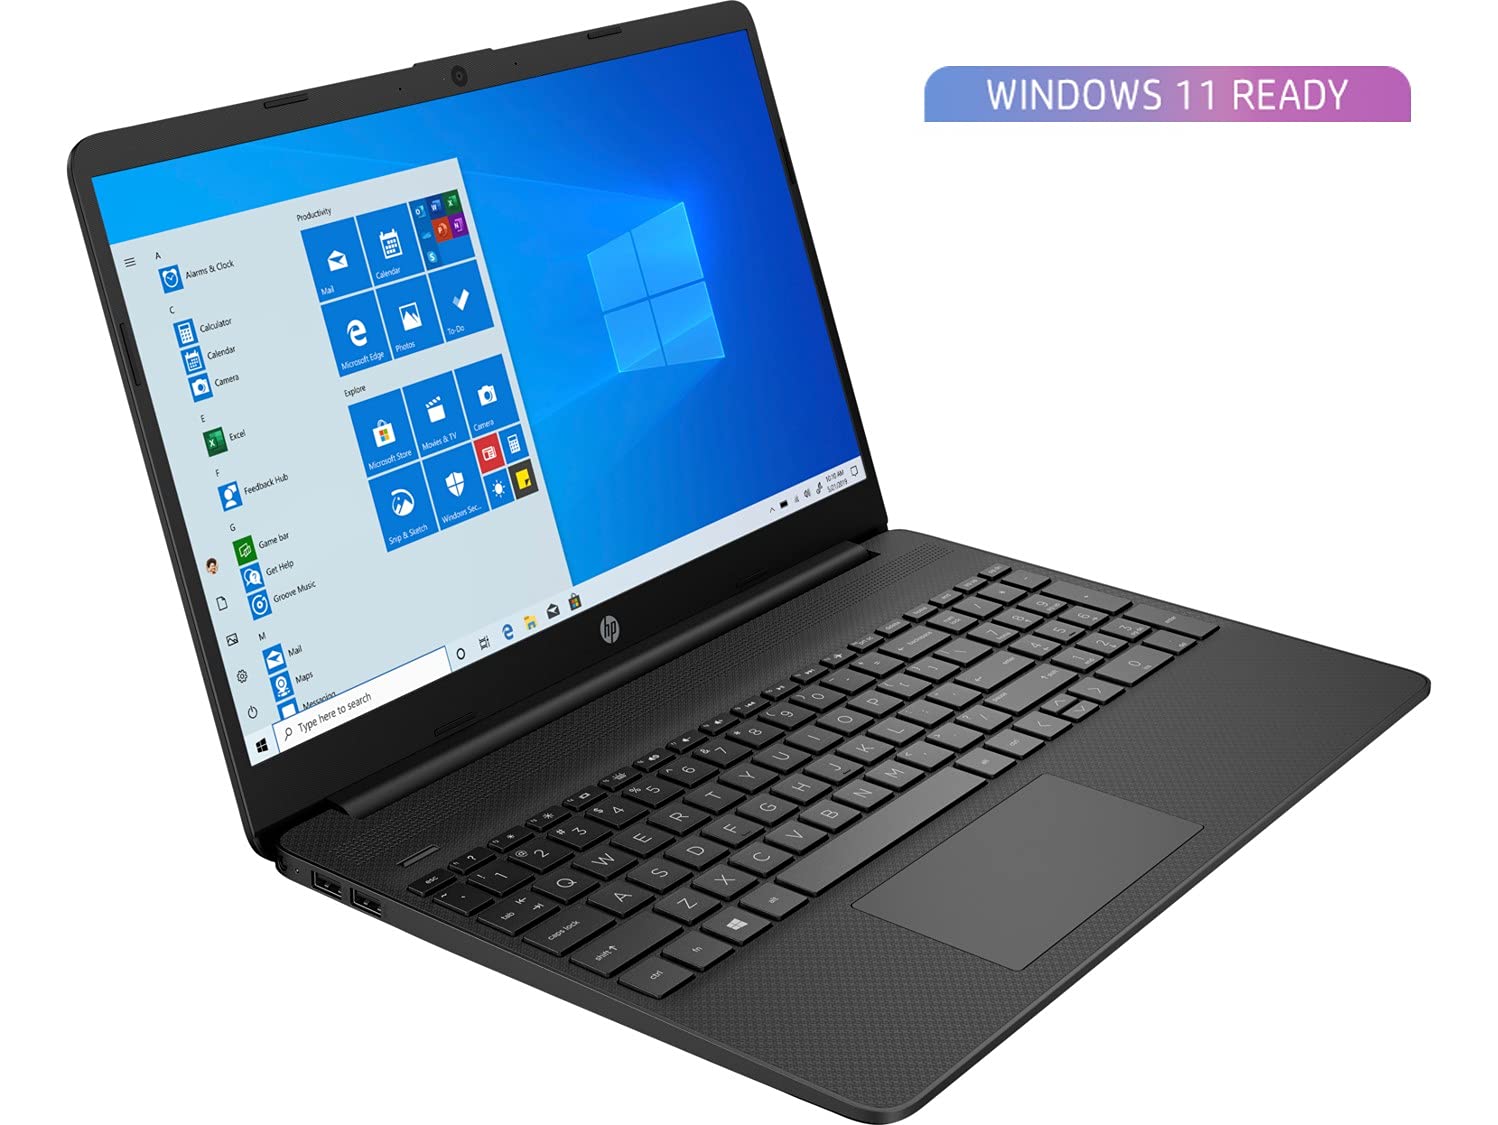 HP 15 11th Gen Core i5 Processor 15.6-inch cm) FHD Laptop (8GB/512GB SSD /Win 10/MS Office/Jet Black/1.69 Kg), With official BAGPACK AND FREEBIES – Breeze Computers